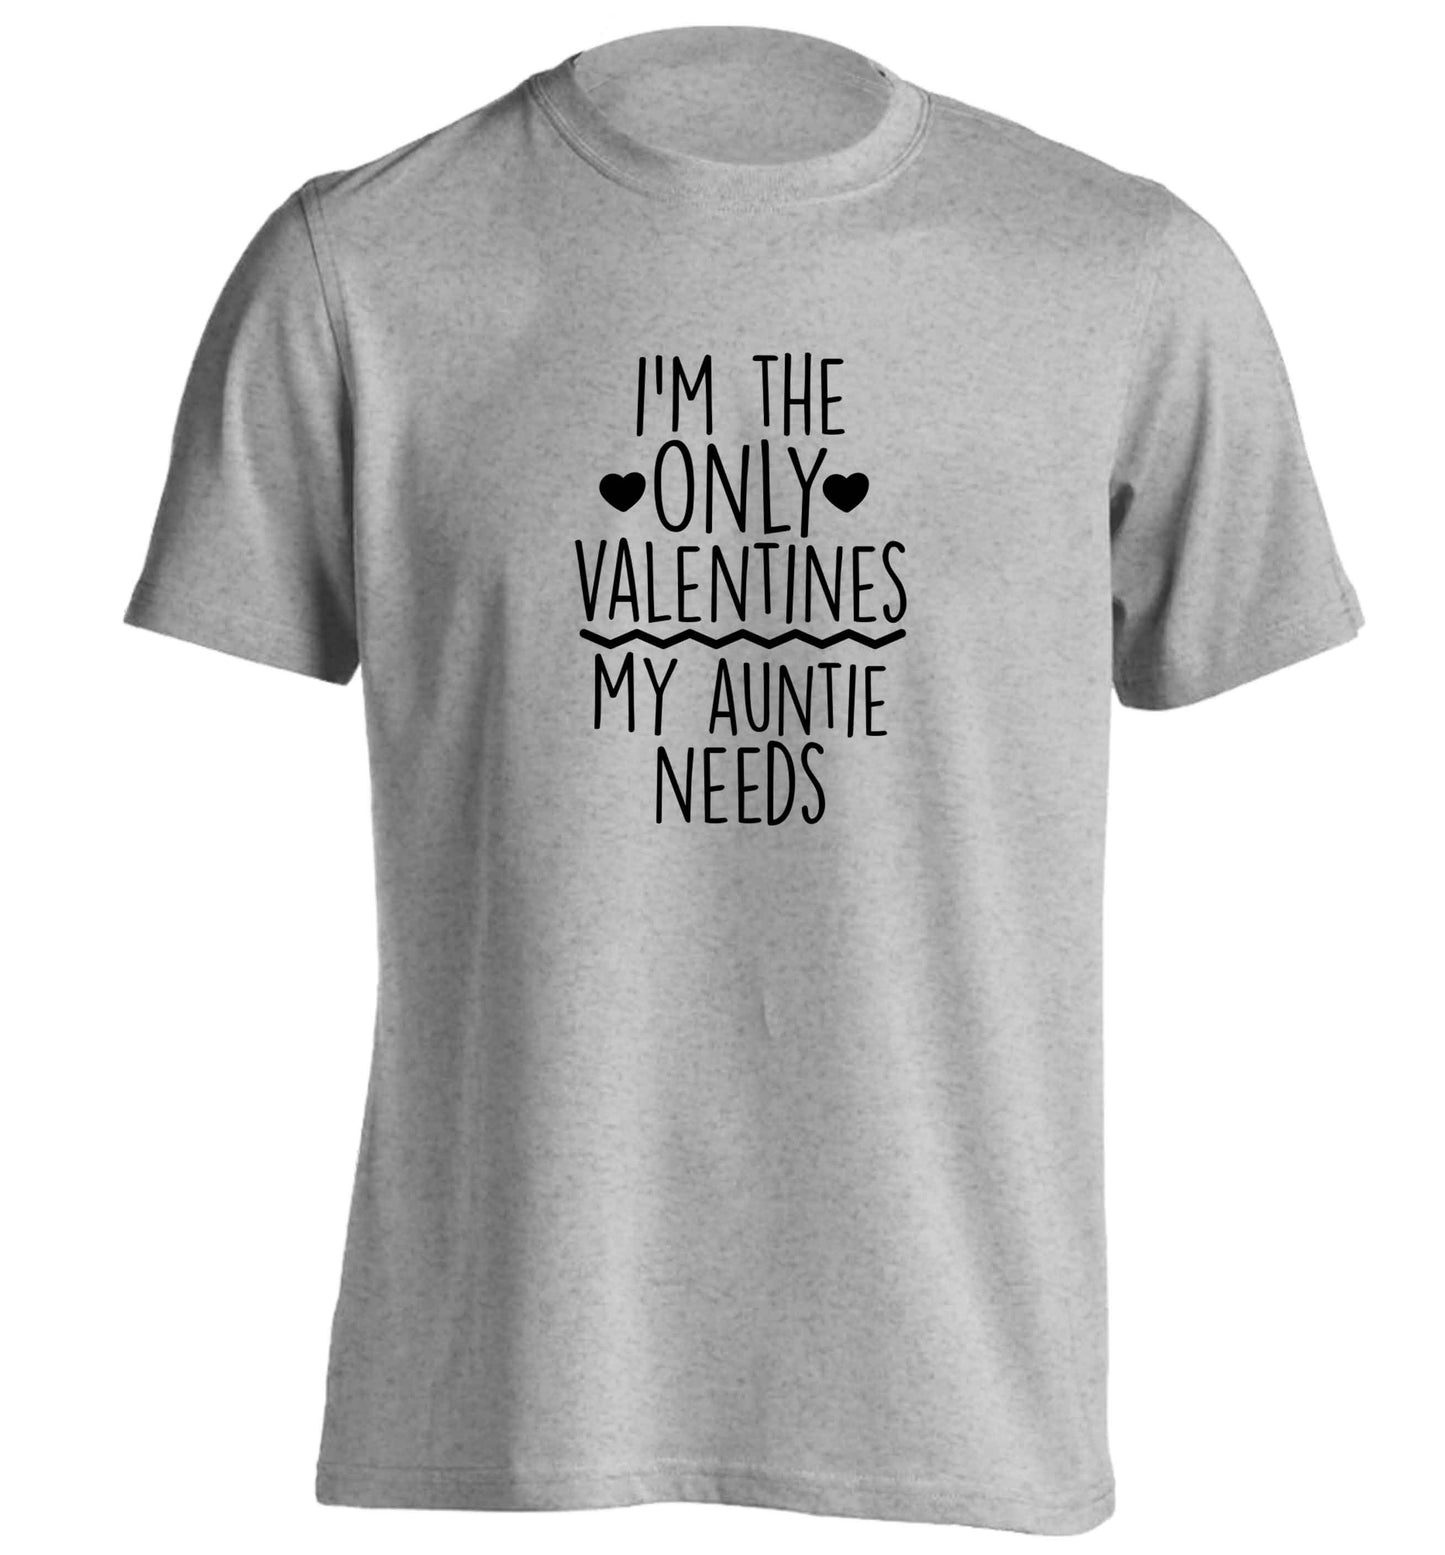 I'm the only valentines my auntie needs adults unisex grey Tshirt 2XL